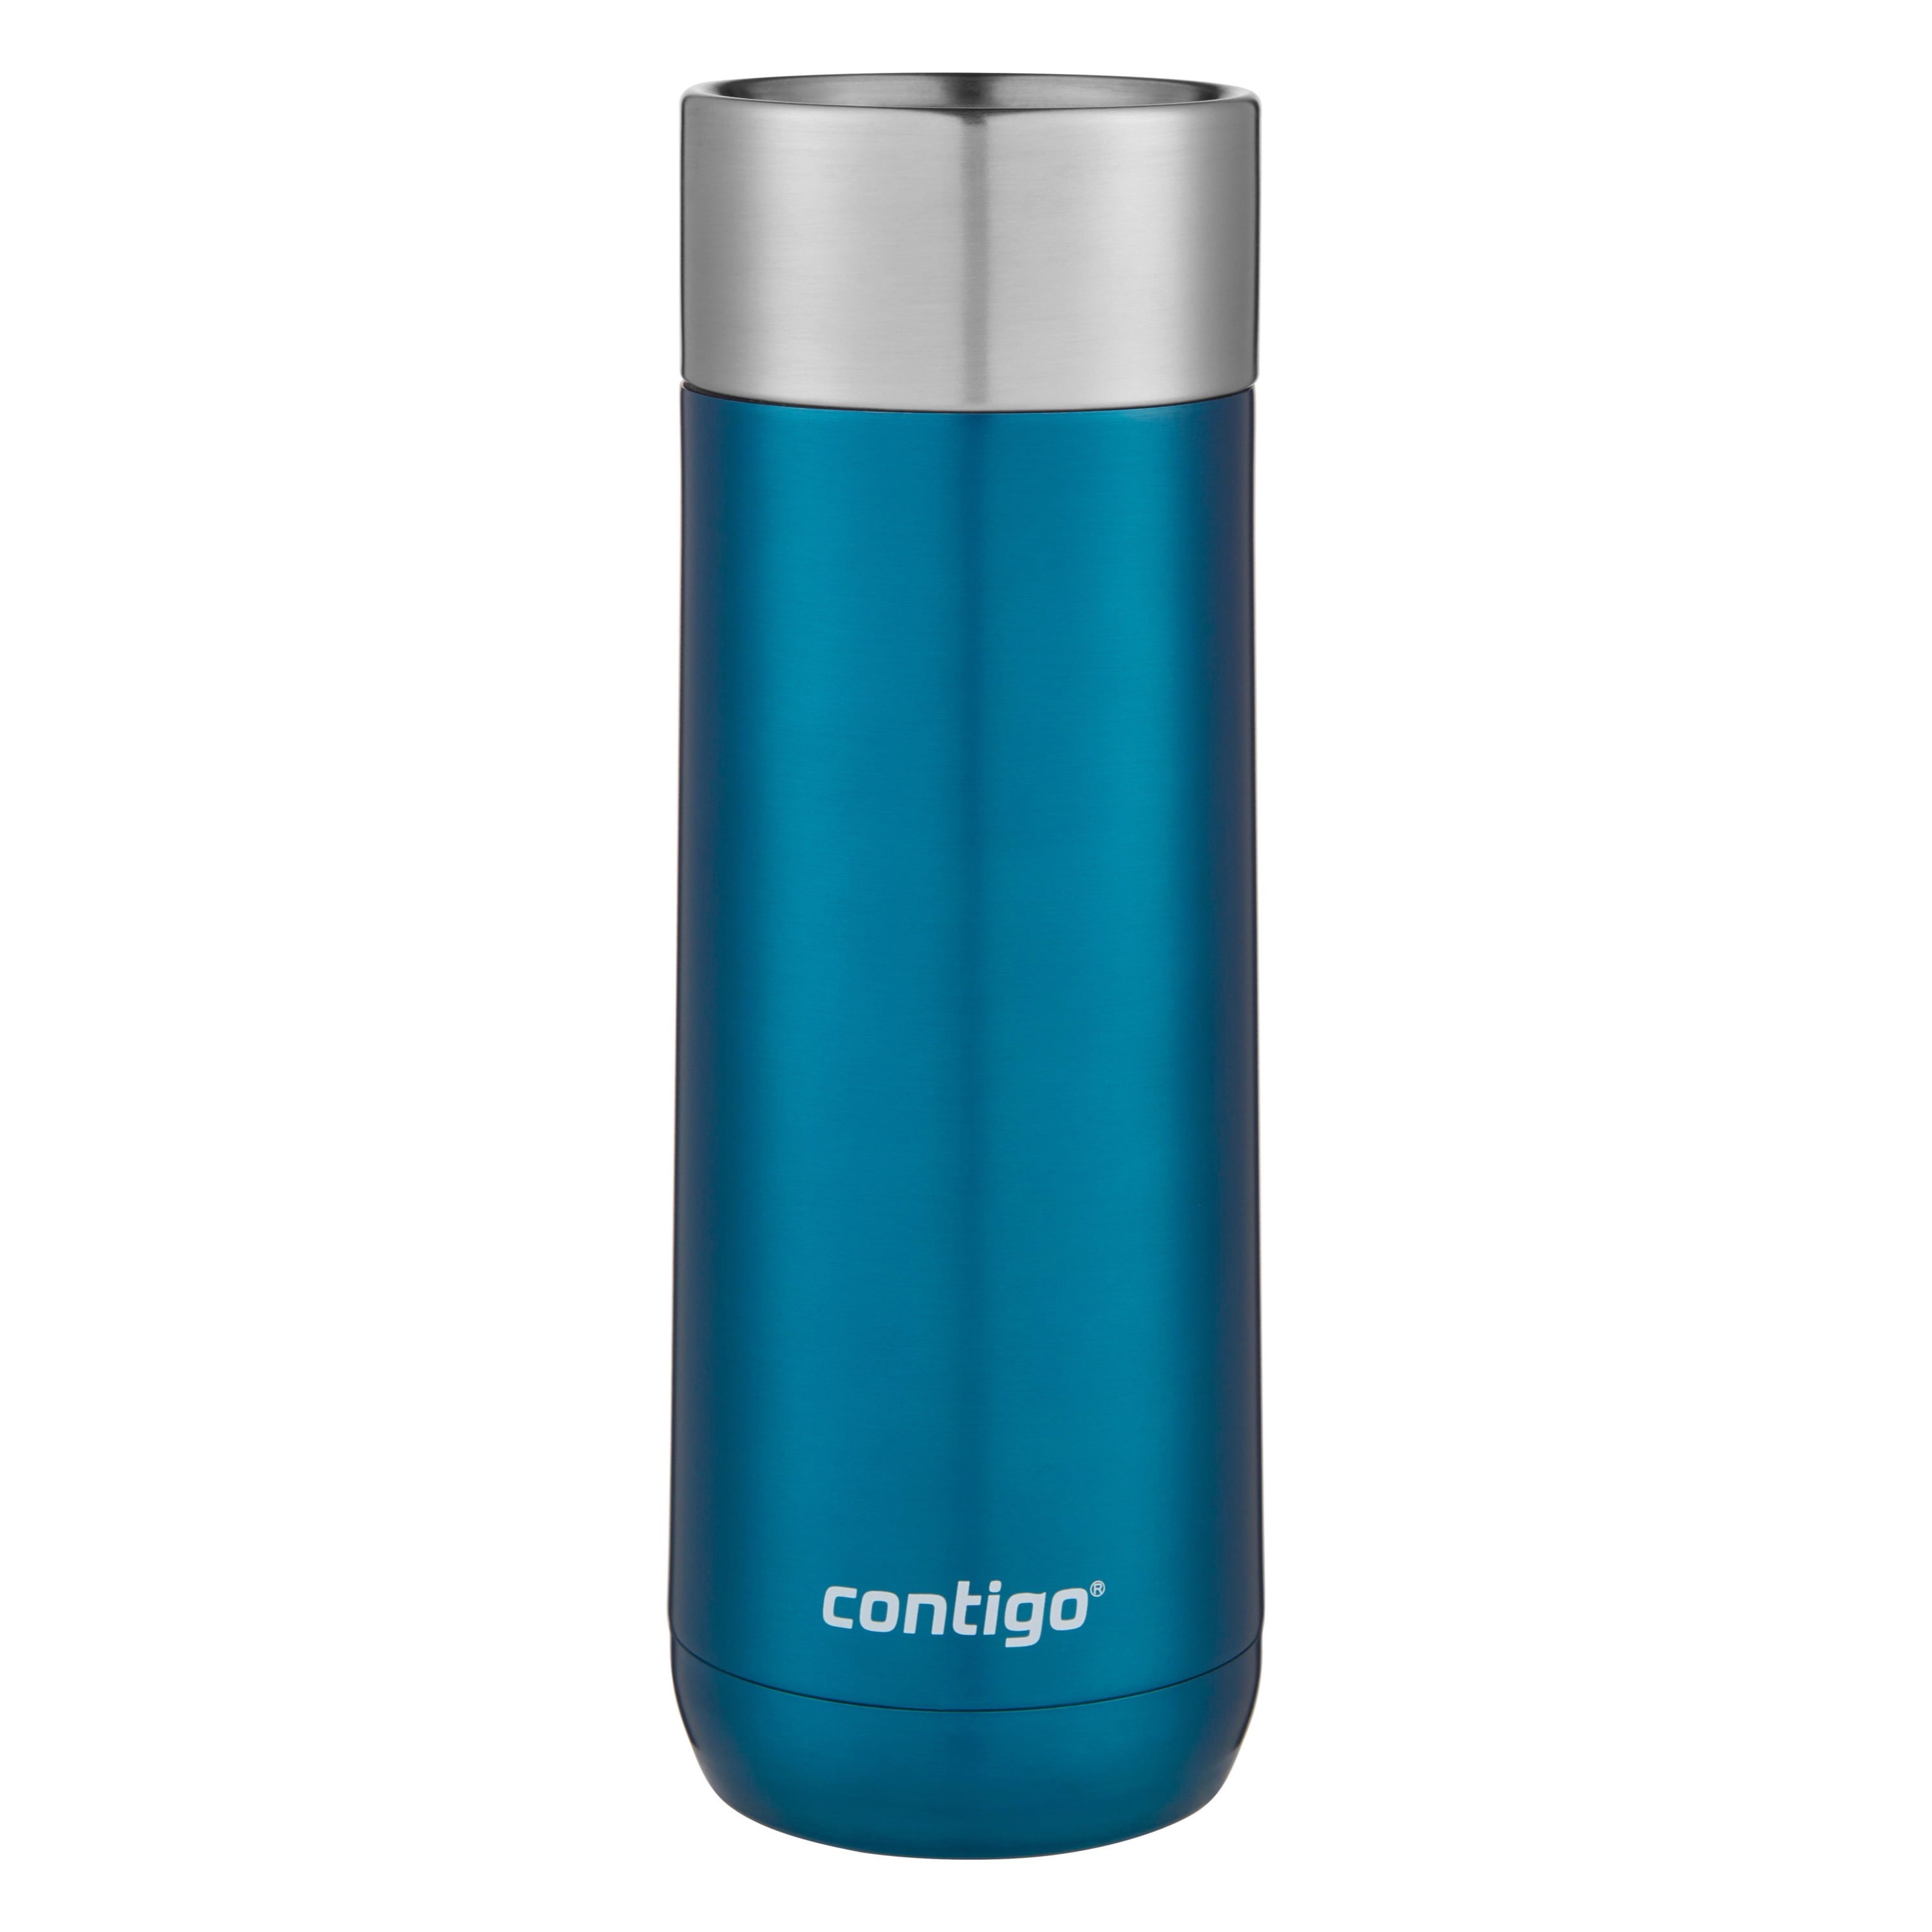 Contigo 16 Oz Luxe Autoseal Vacuum-insulated Coffee Travel Mug Spill-proof  with Stainless Steel Thermalock Double-wall Insulation, Biscay Bay 